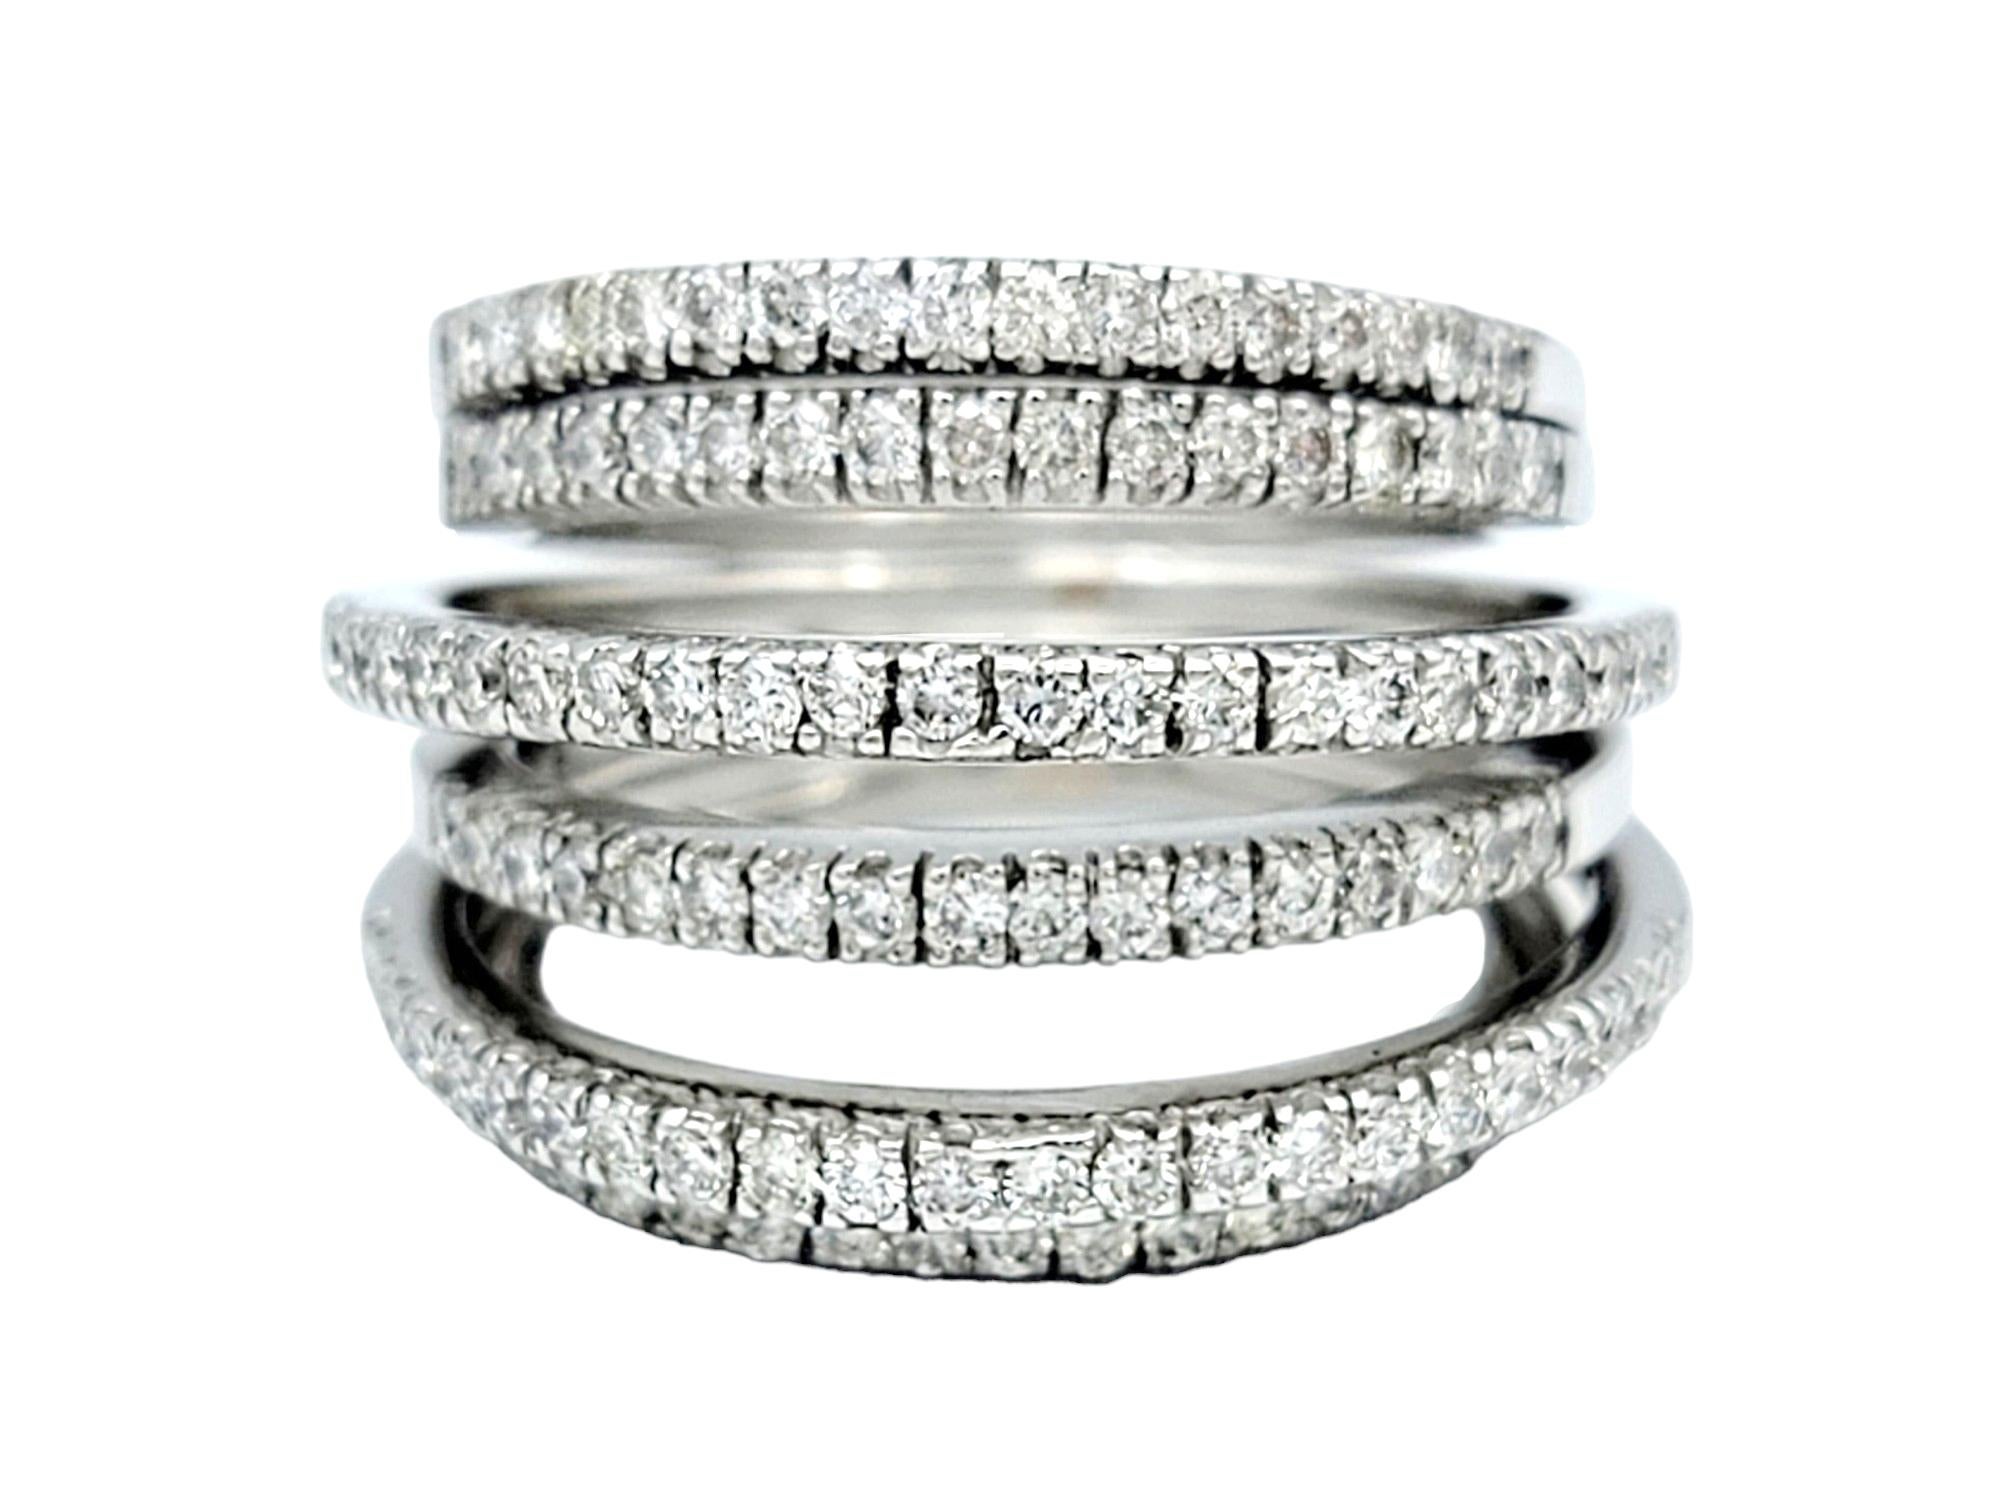 Ring Size: 6

This timeless diamond band ring set in luxurious 18-karat white gold artfully creates the illusion of seven individual diamond bands beautifully fused together. Set in varying heights, the layered look of the bands adds depth and